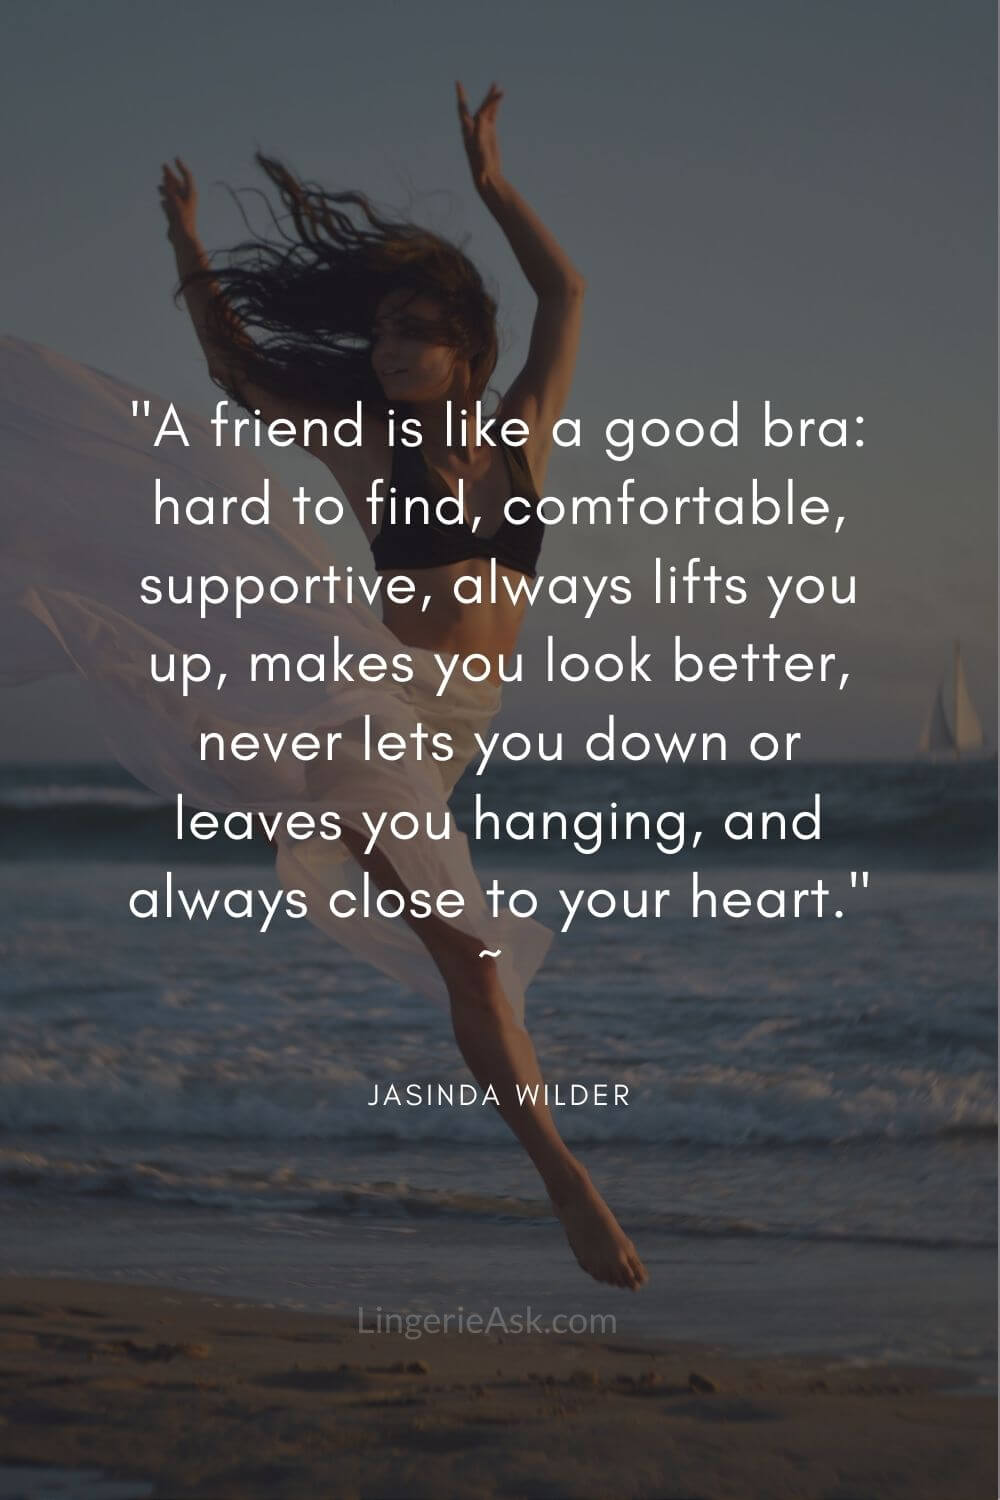 A friend is like a good bra hard to find, comfortable, supportive, always lifts you up, makes you look better, never lets you down or leaves you hanging, and always close to your heart. _ Jasinda Wilder